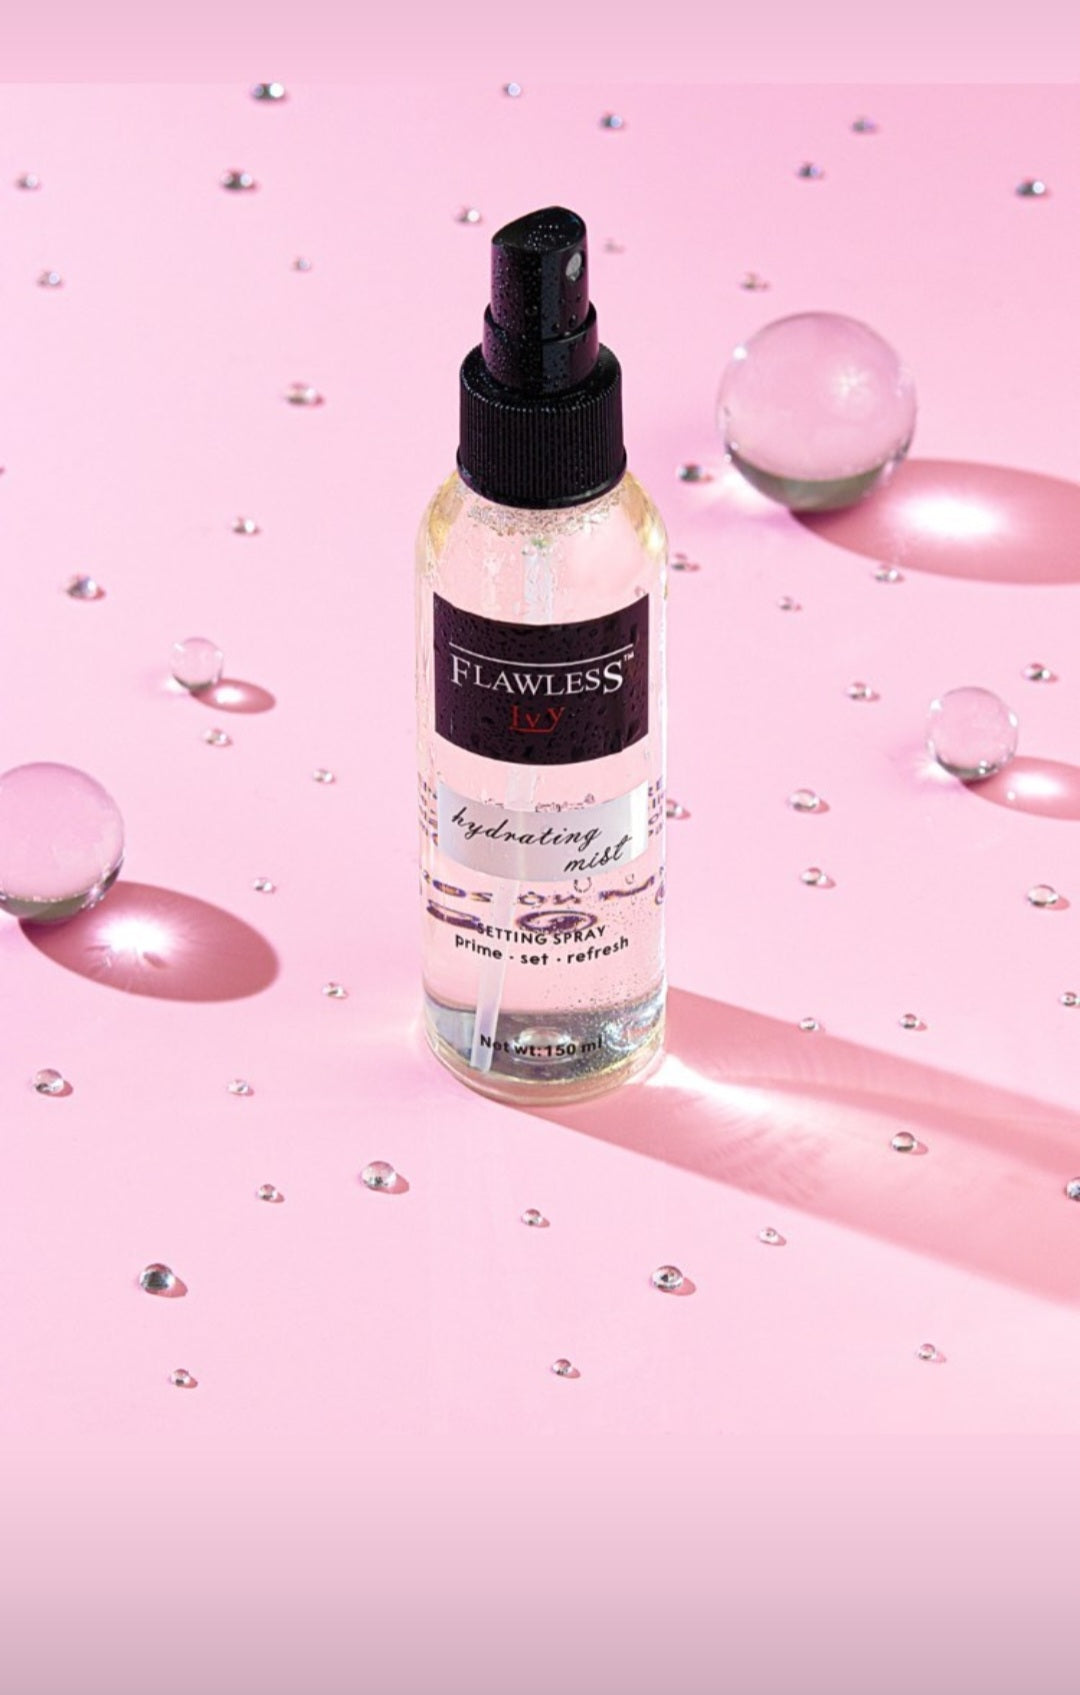 FLAWLESS IVY HYDRATING SETTING SPRAY FOR ALL SKIN TYPES~ Spray fissante idratante per tutti i tipi di pelle 150ml - SANDY'S MAKEUP AND ARTISTRY 